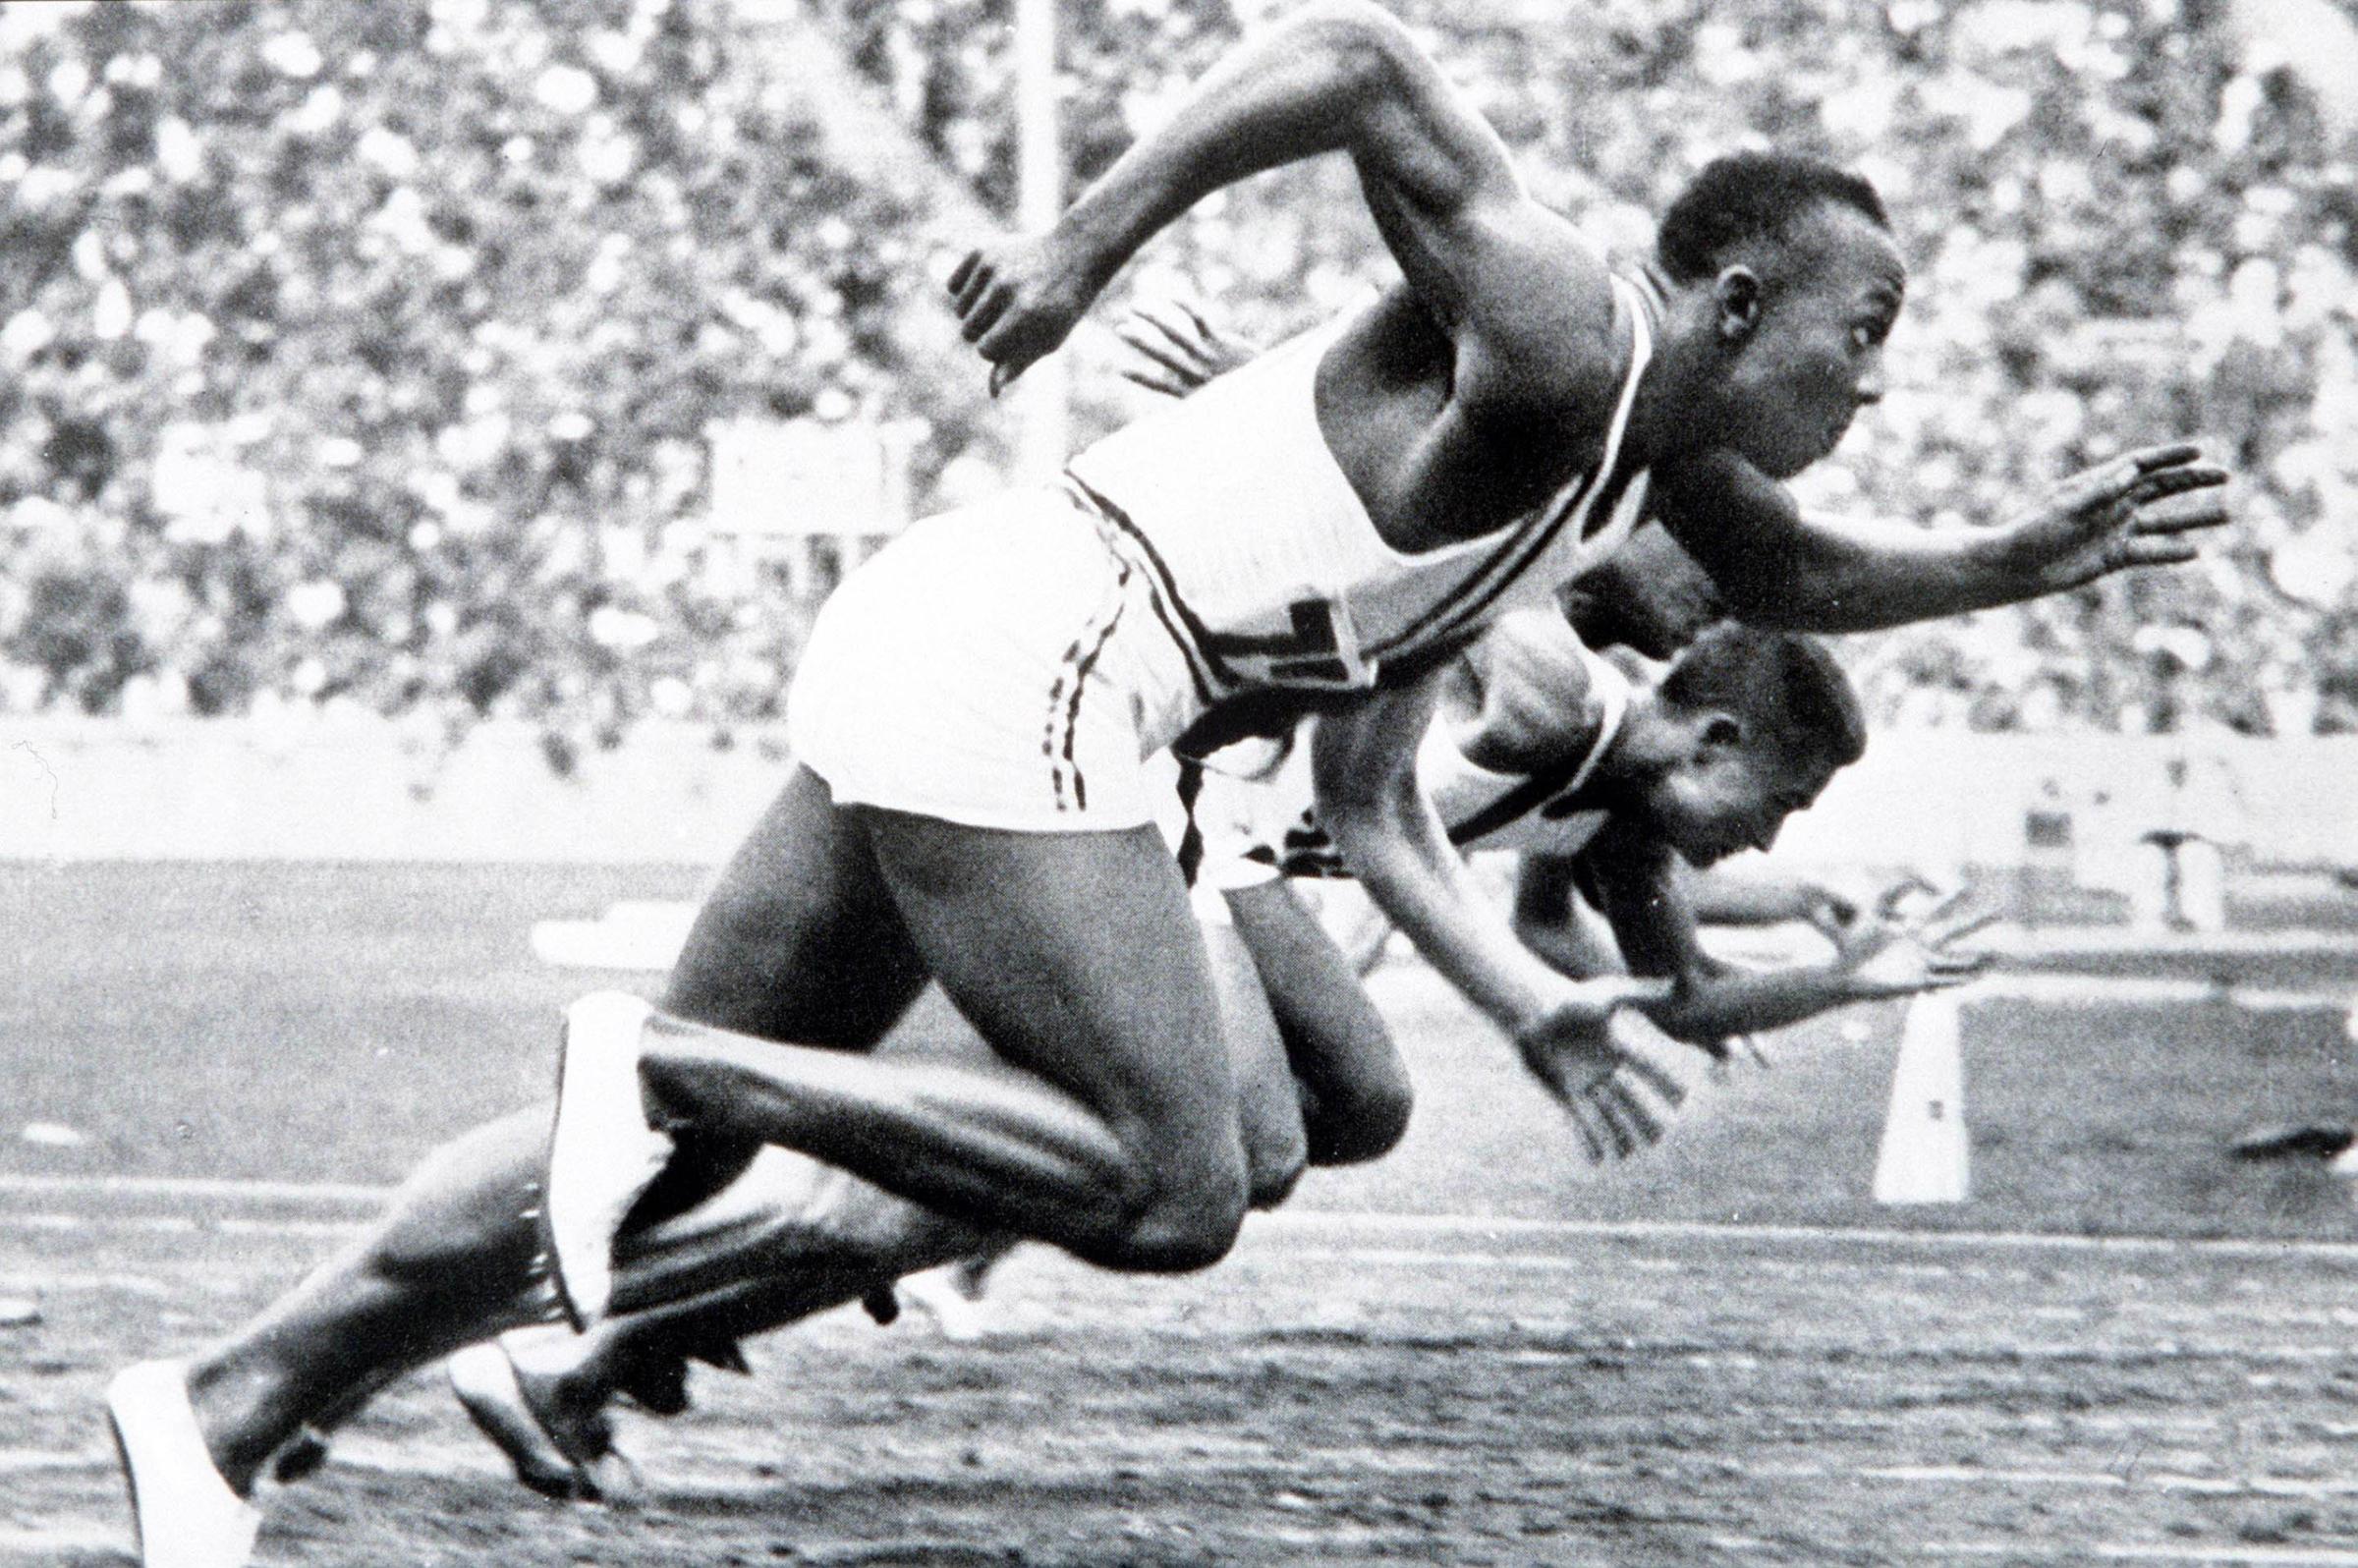 1936 Olympic Games, Berlin, Germany, Men's 100 Metres Final, USA's legendary Jesse Owens on his way to winning one of his four gold medals.